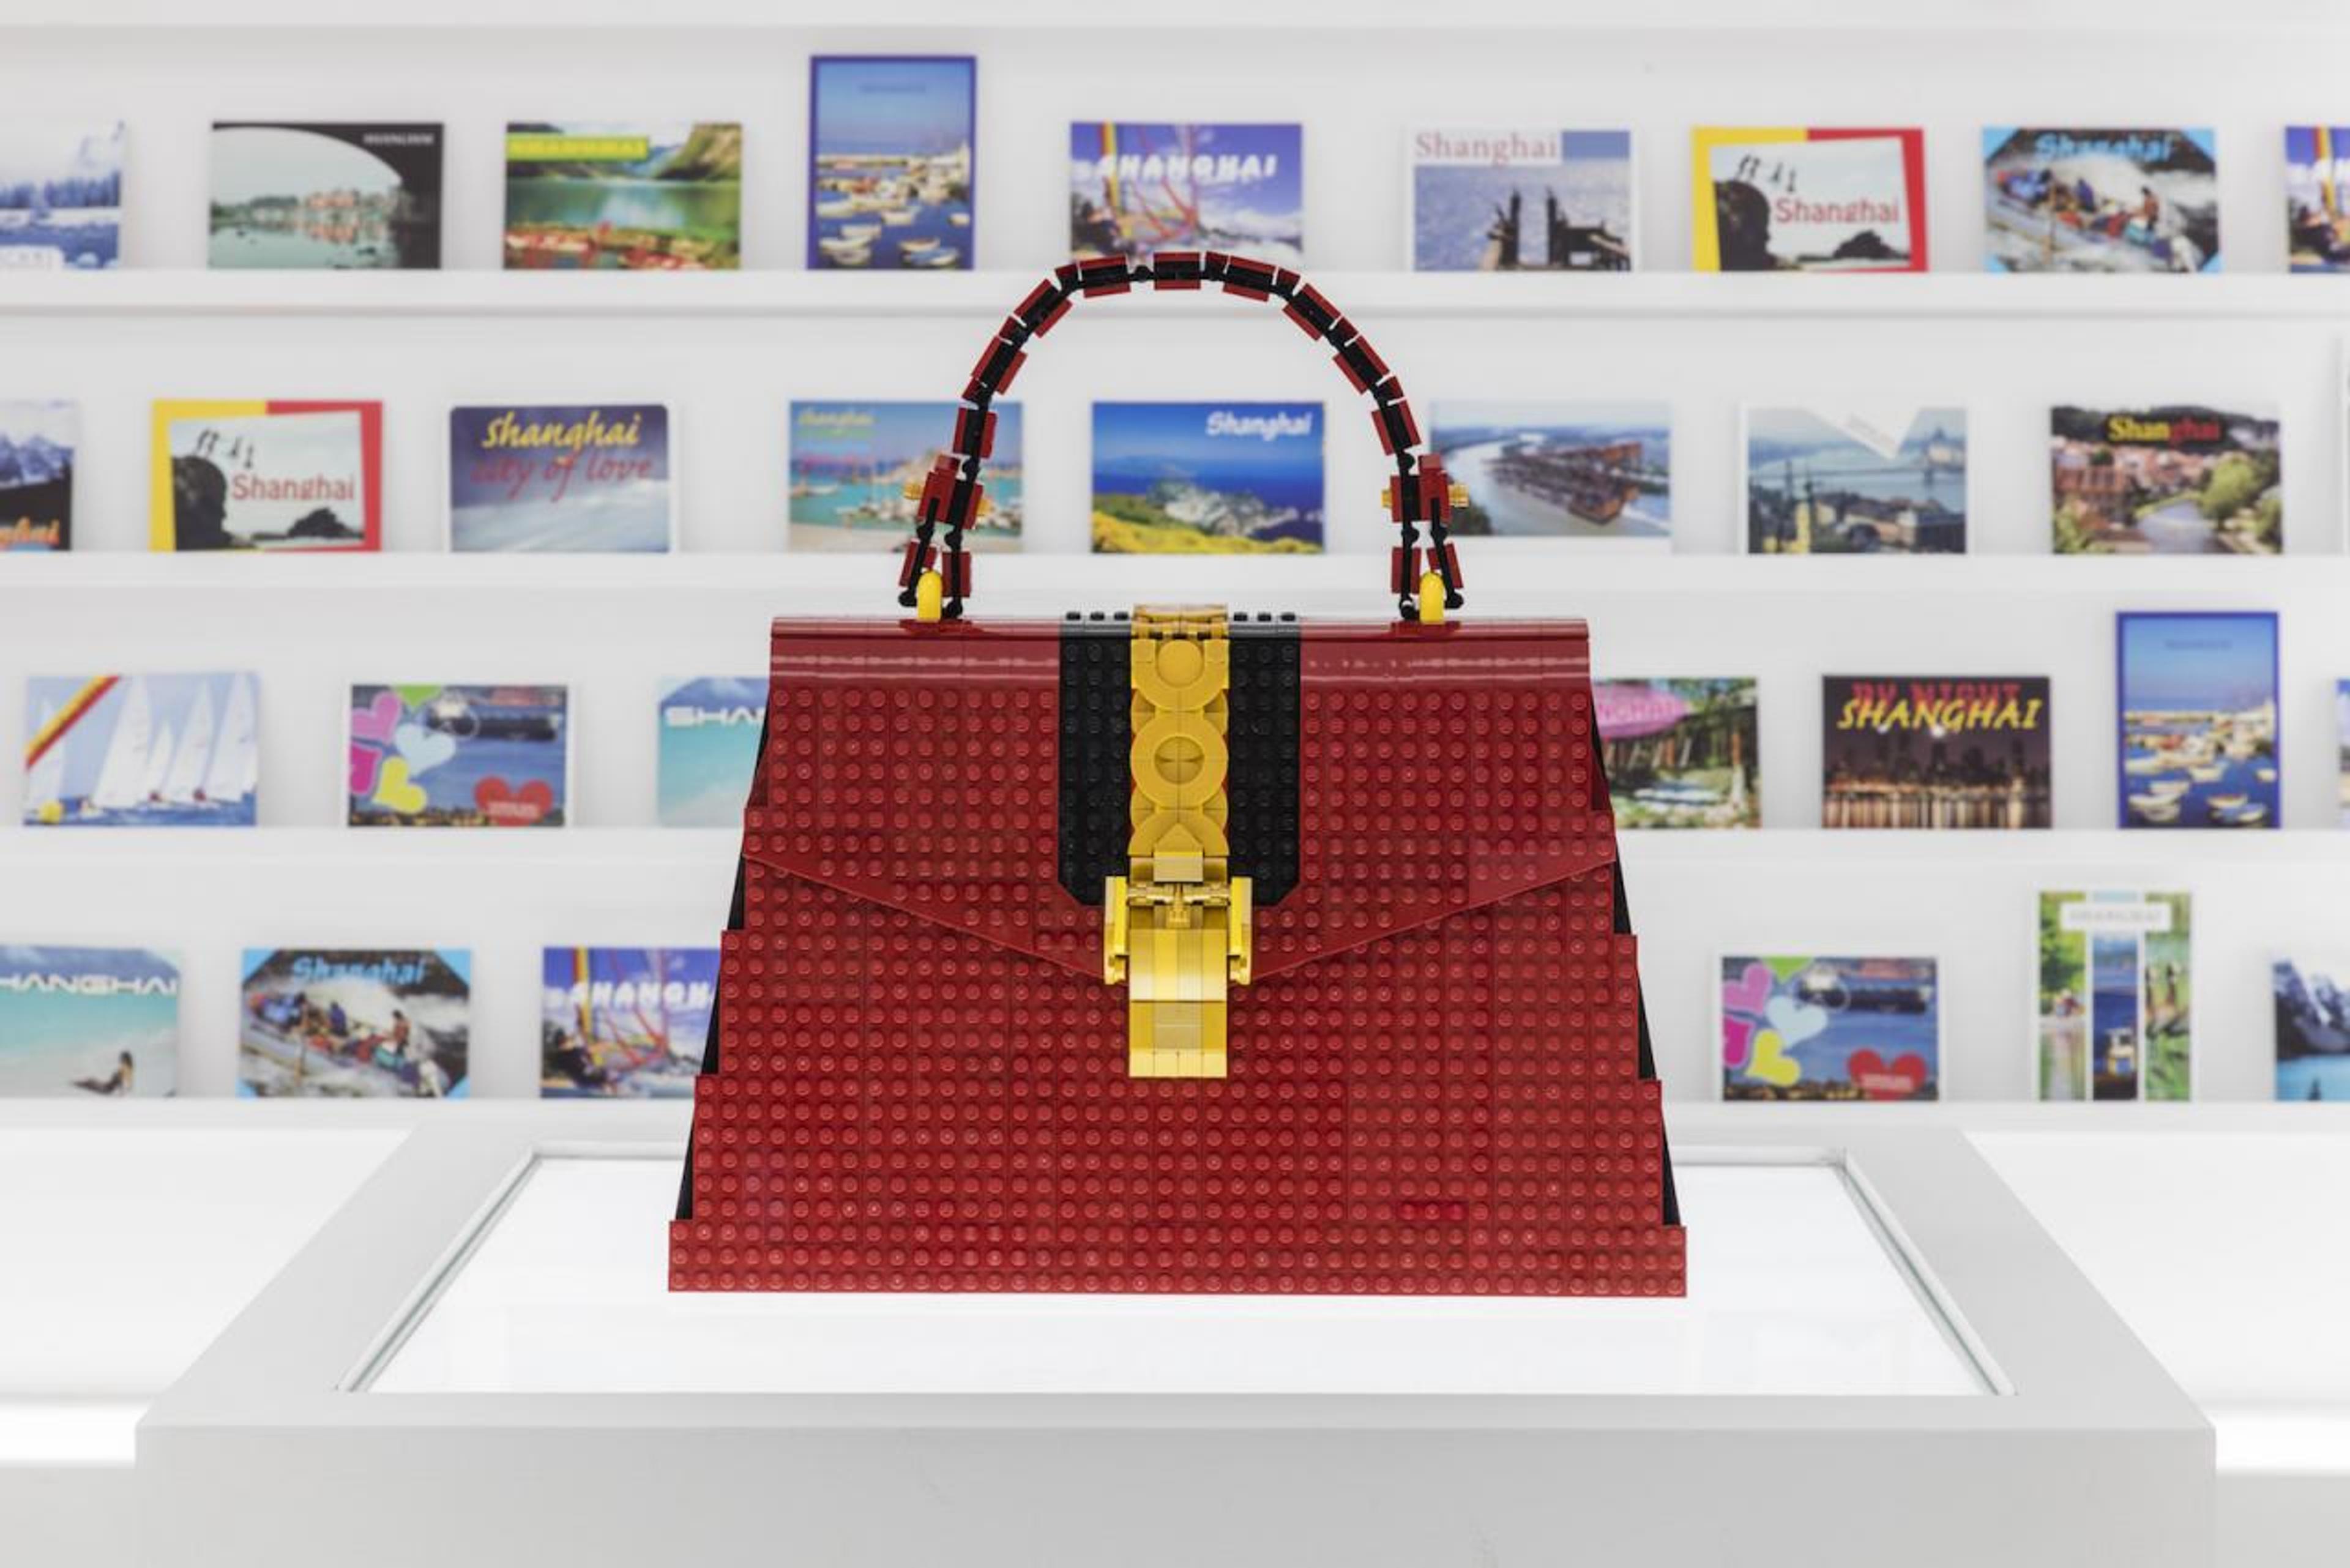 Andy Hung Chi-Kin (LEGO Certified Professional) Gucci Sylvie bag made with LEGO bricks Courtesy of Gucci